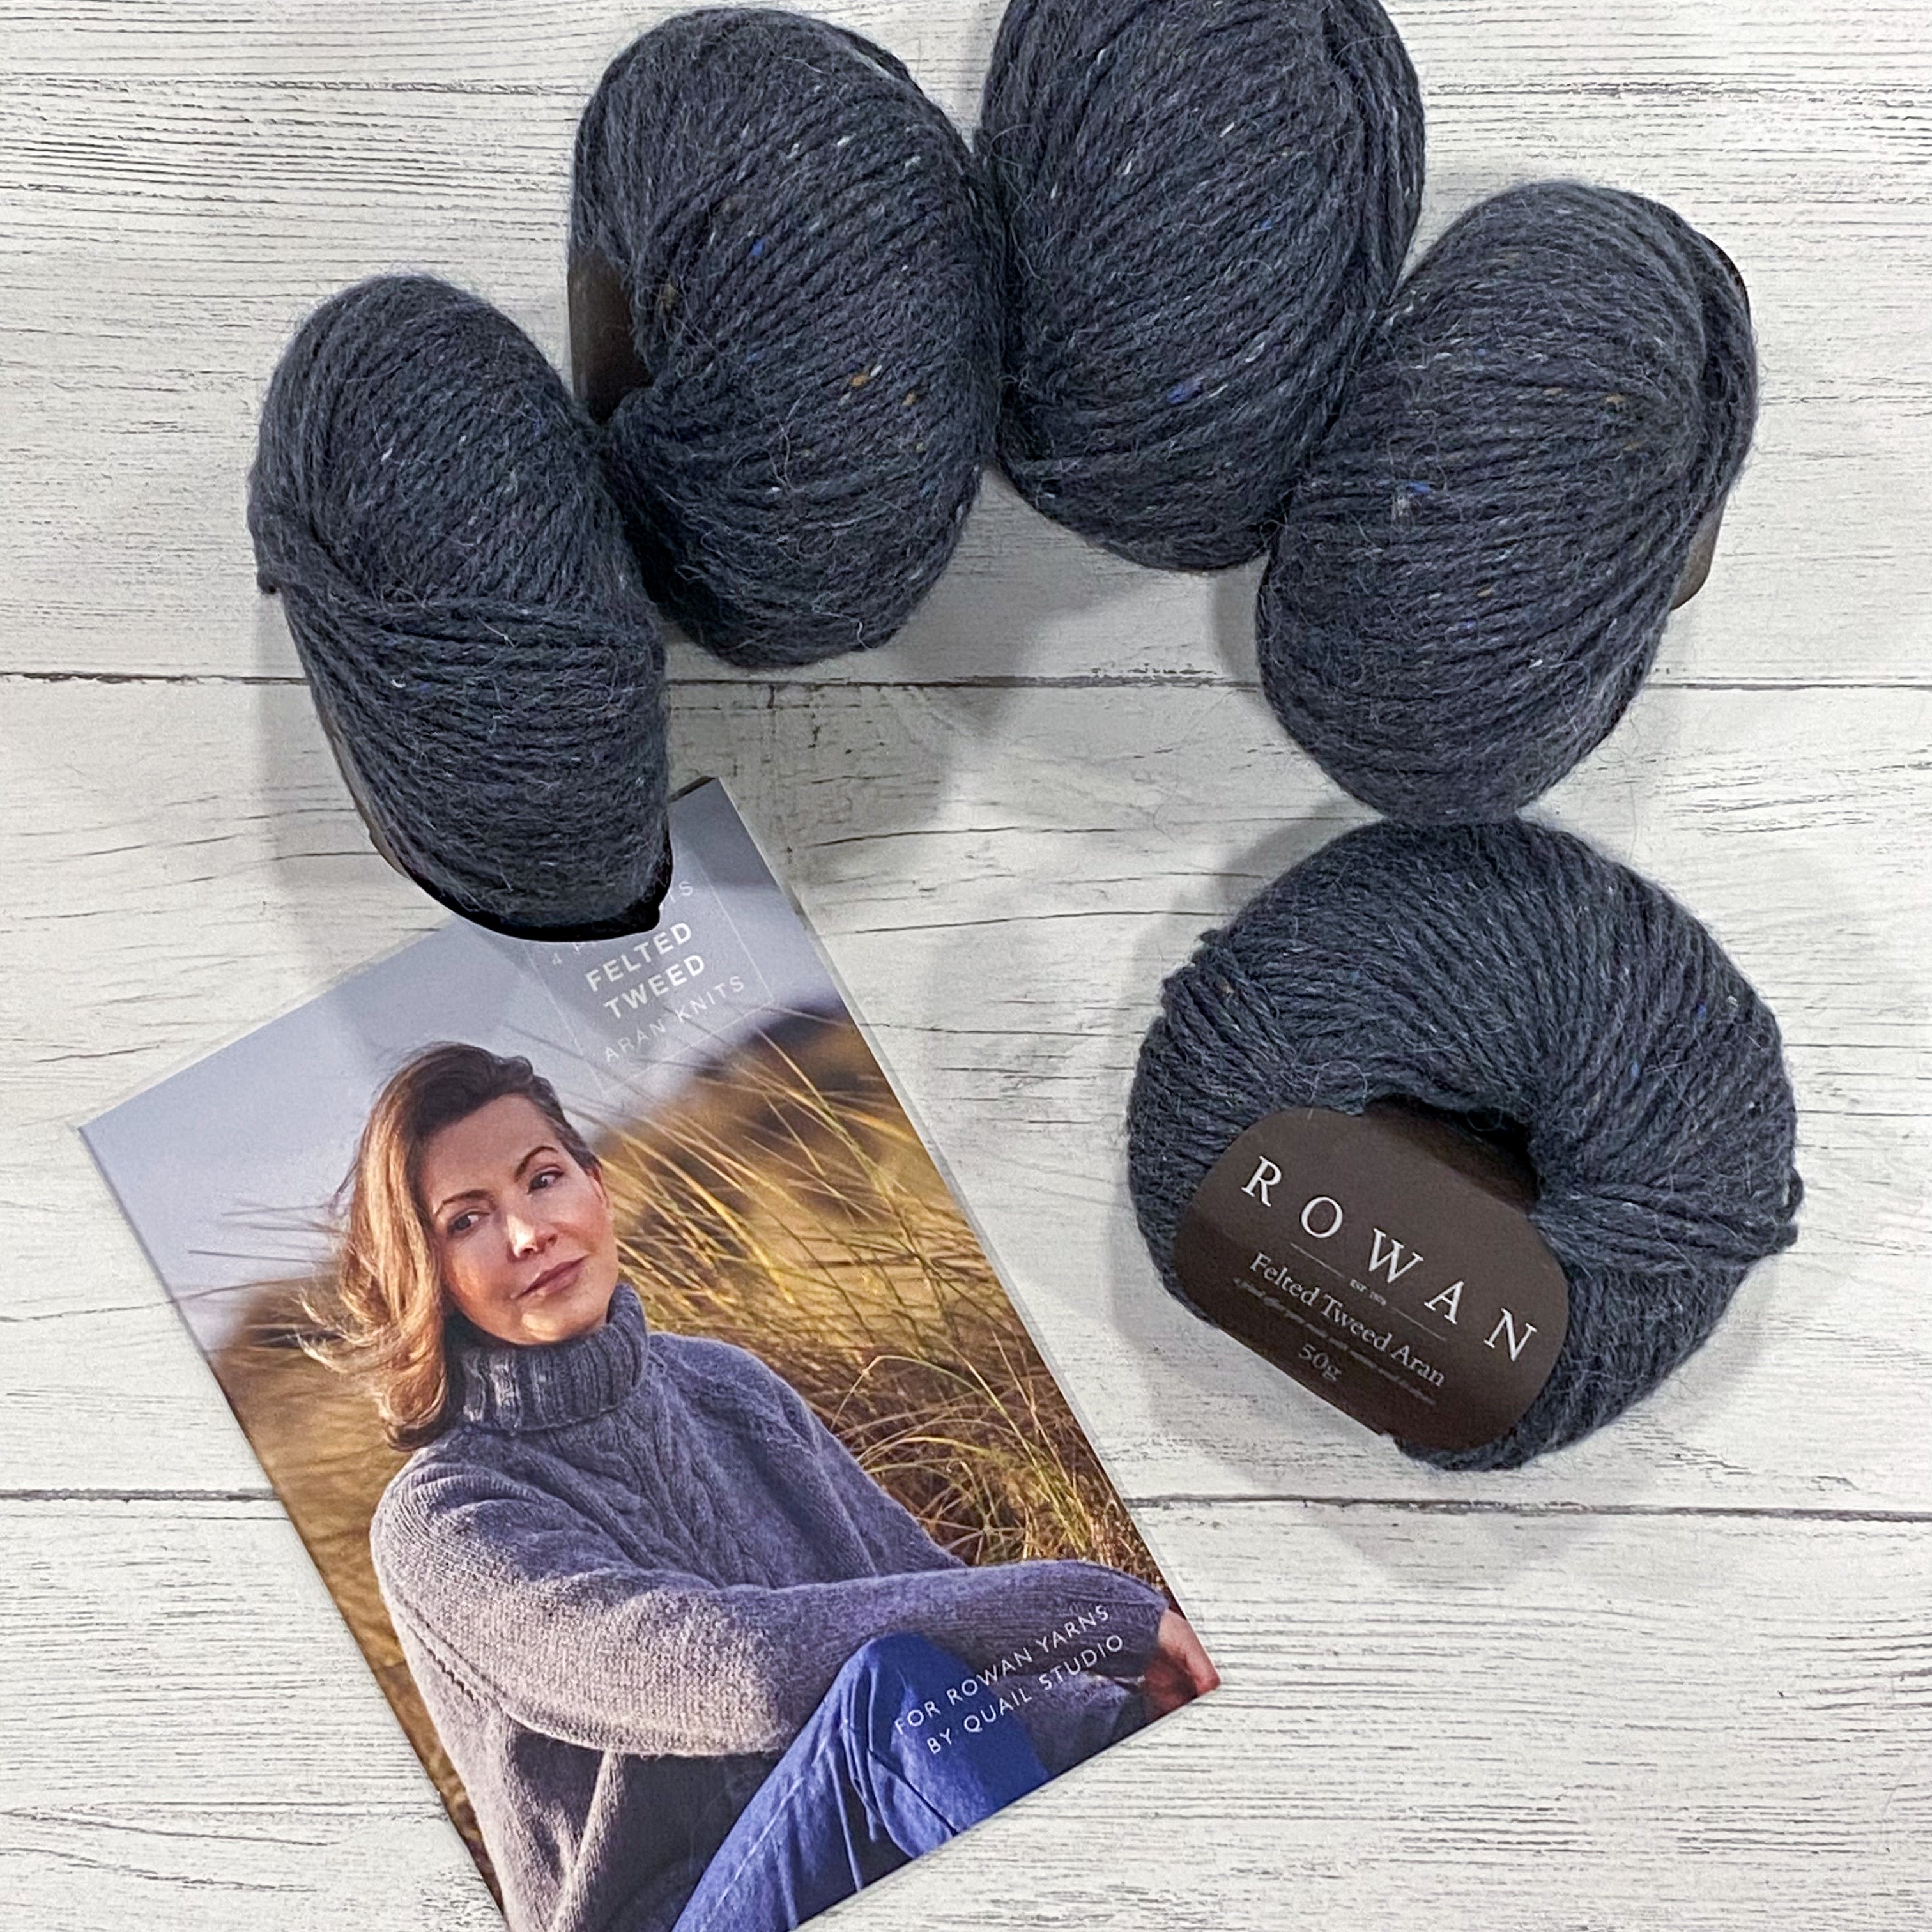 Rowan Felted Tweed Aran Clearance Bundles with FREE Patterns (while stock lasts)